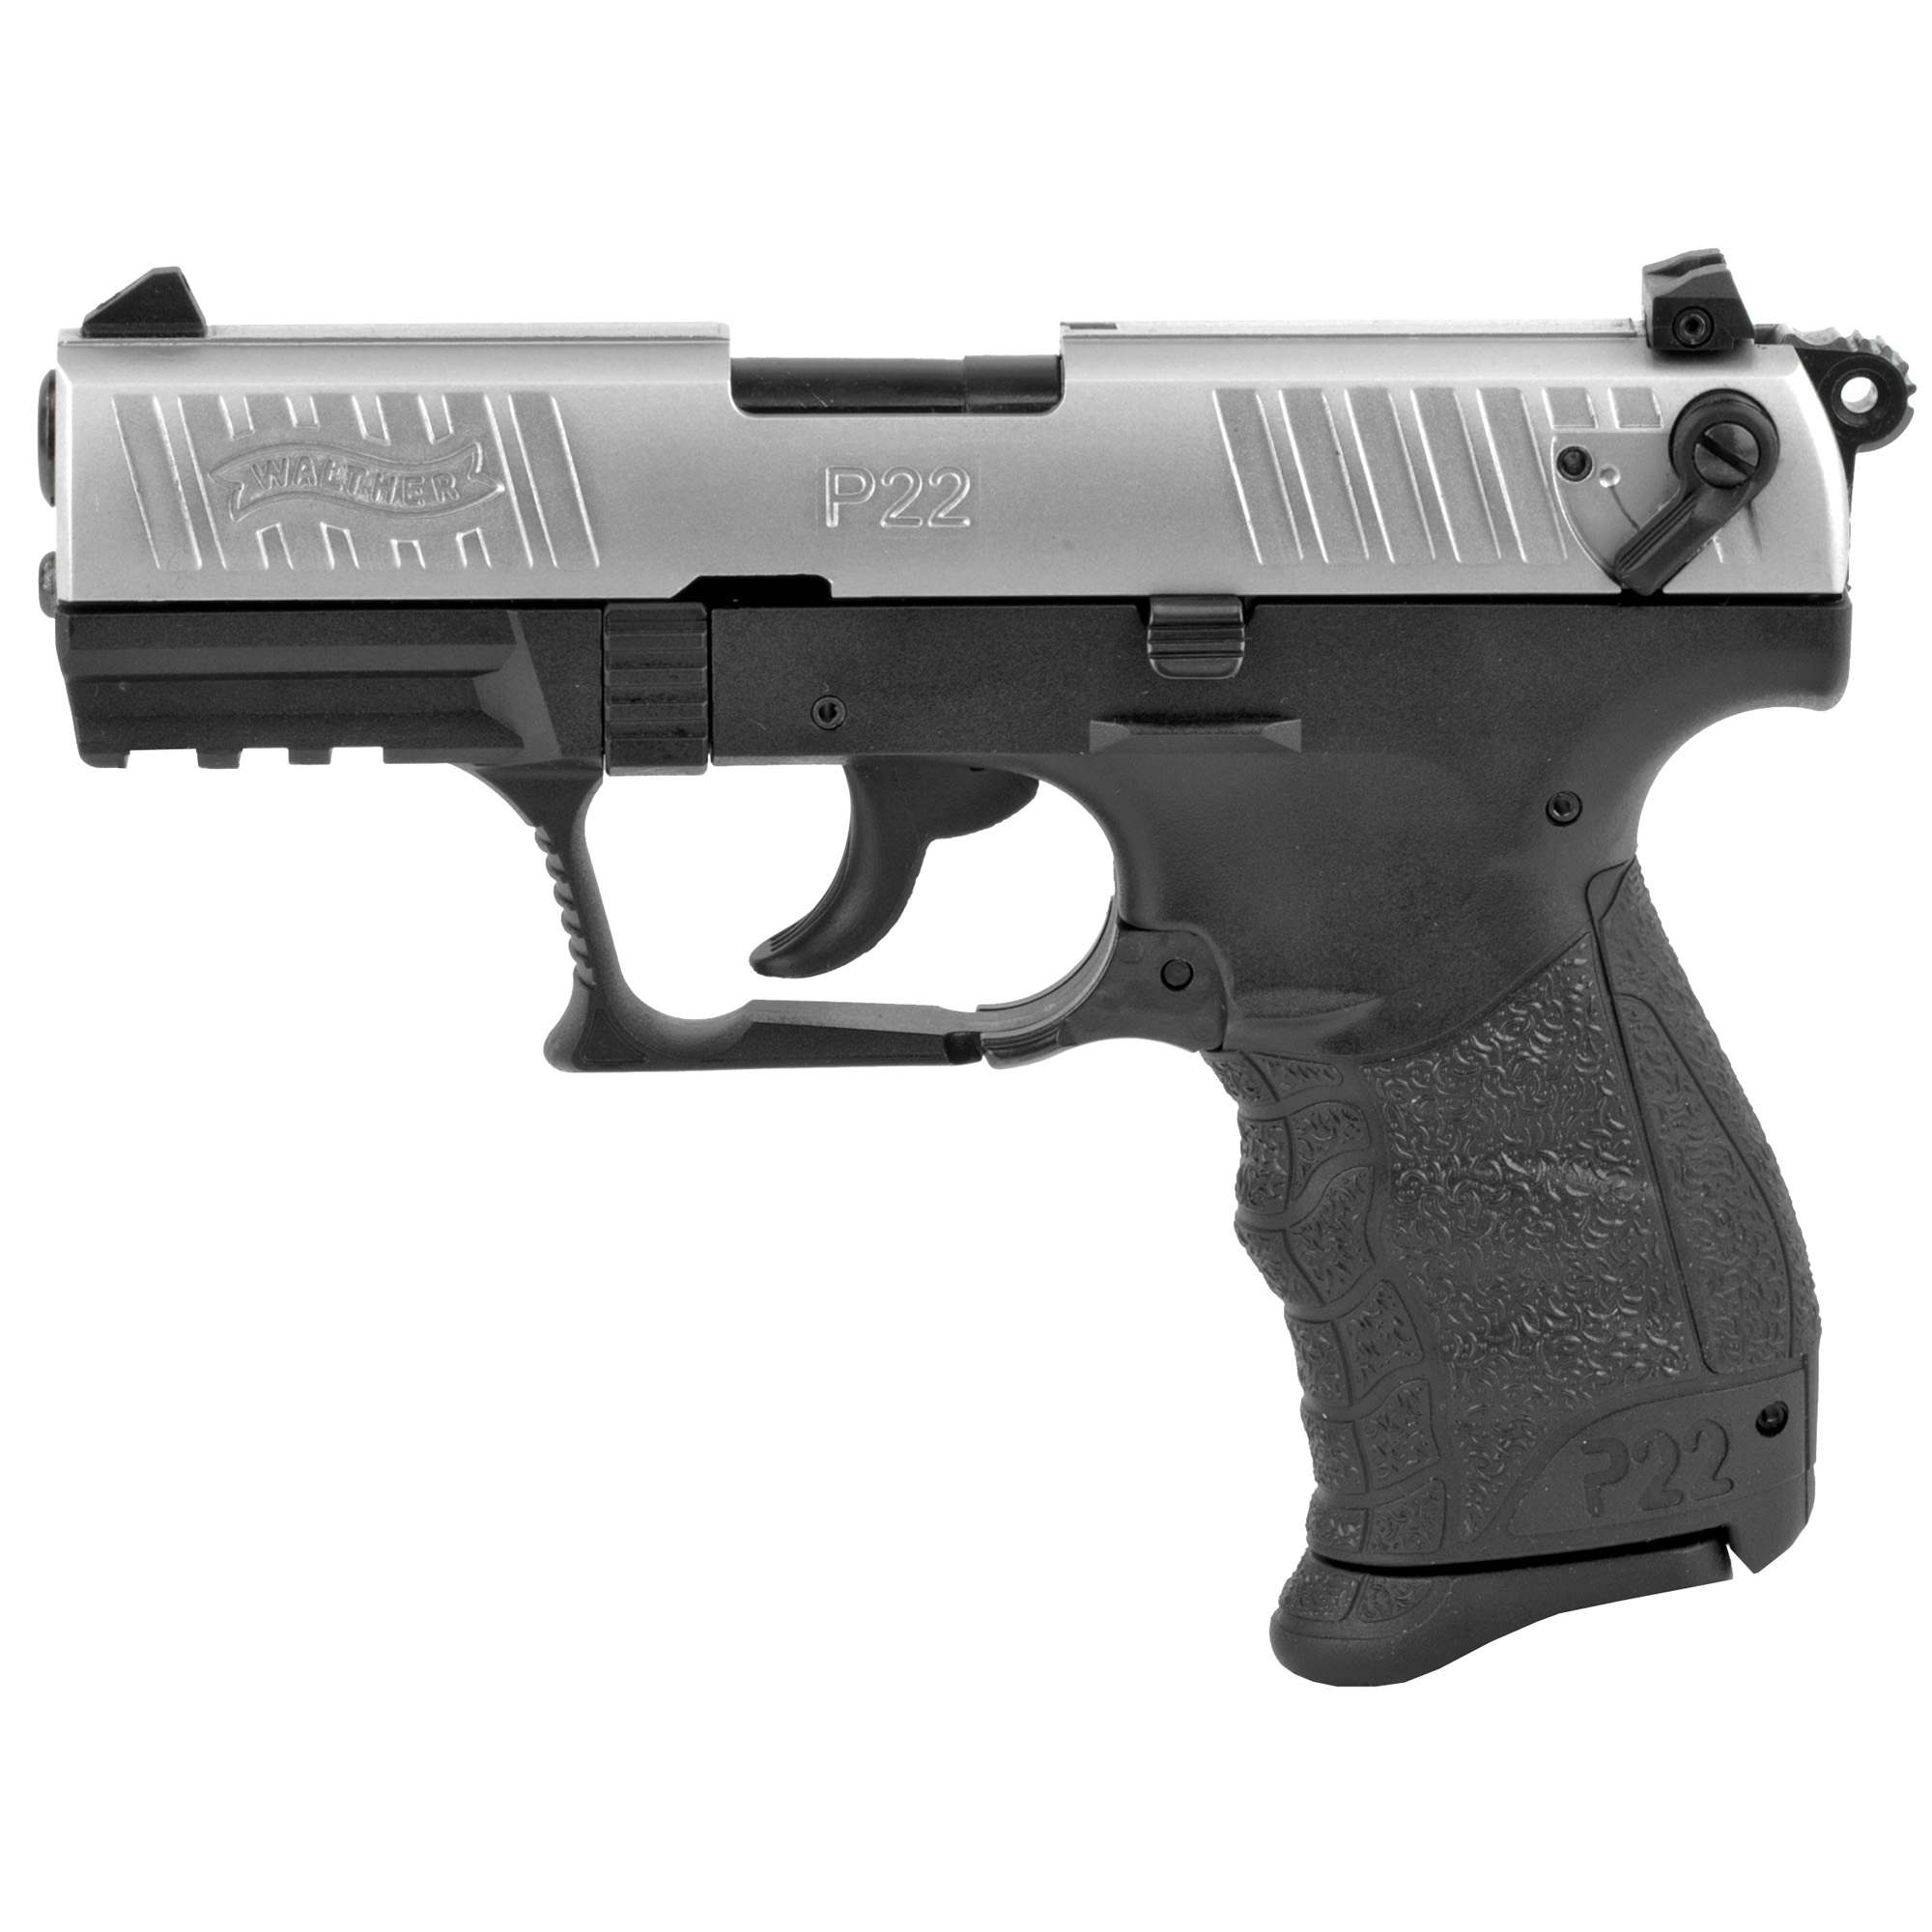 WALTHER P22Q 22LR 3.42 10RD NICKEL